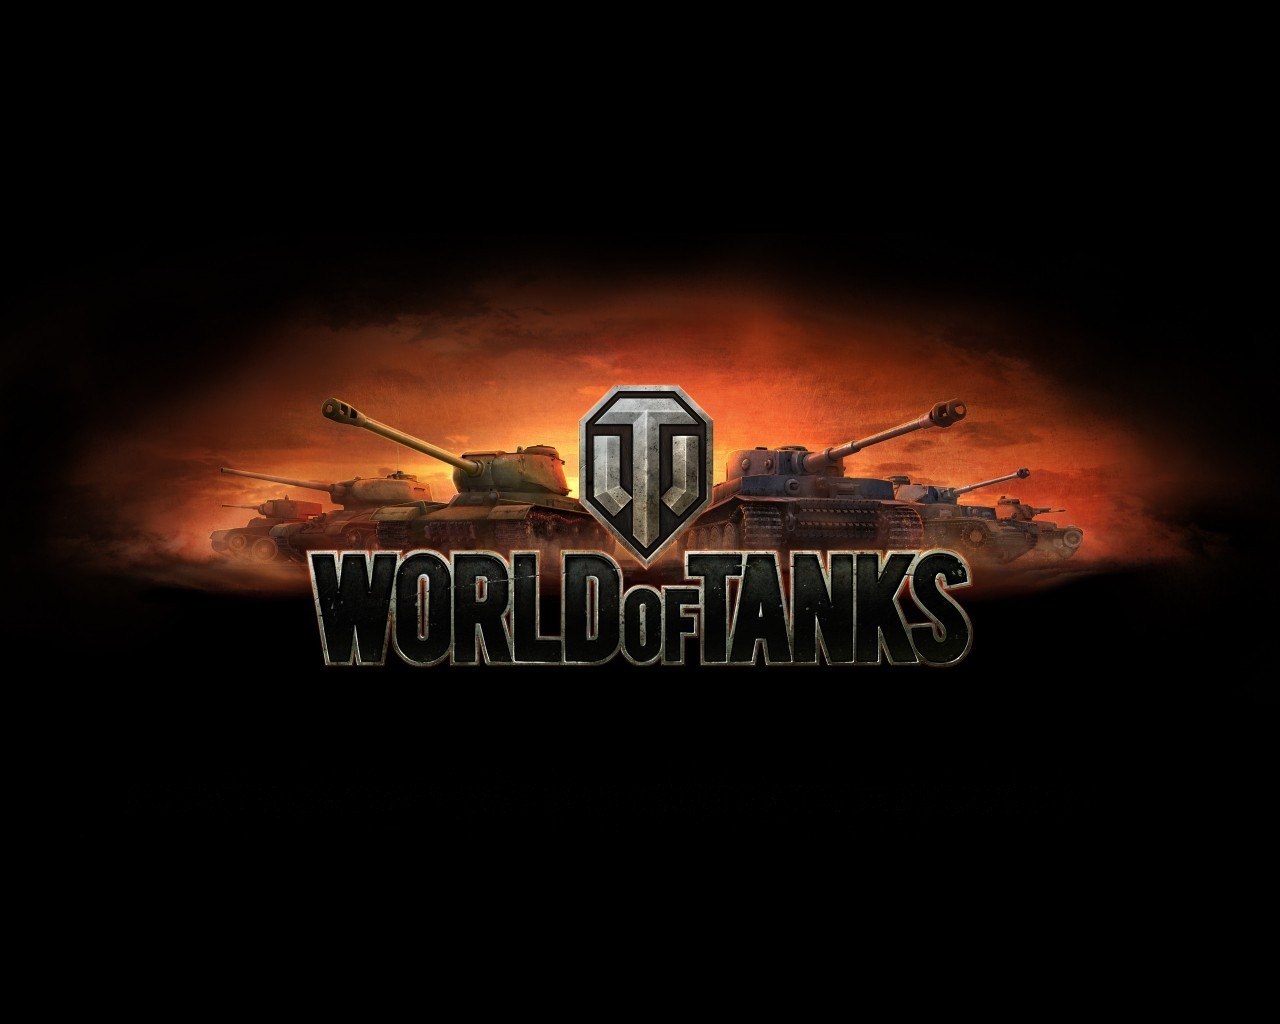 World of Tanks Poster for 1280 x 1024 resolution